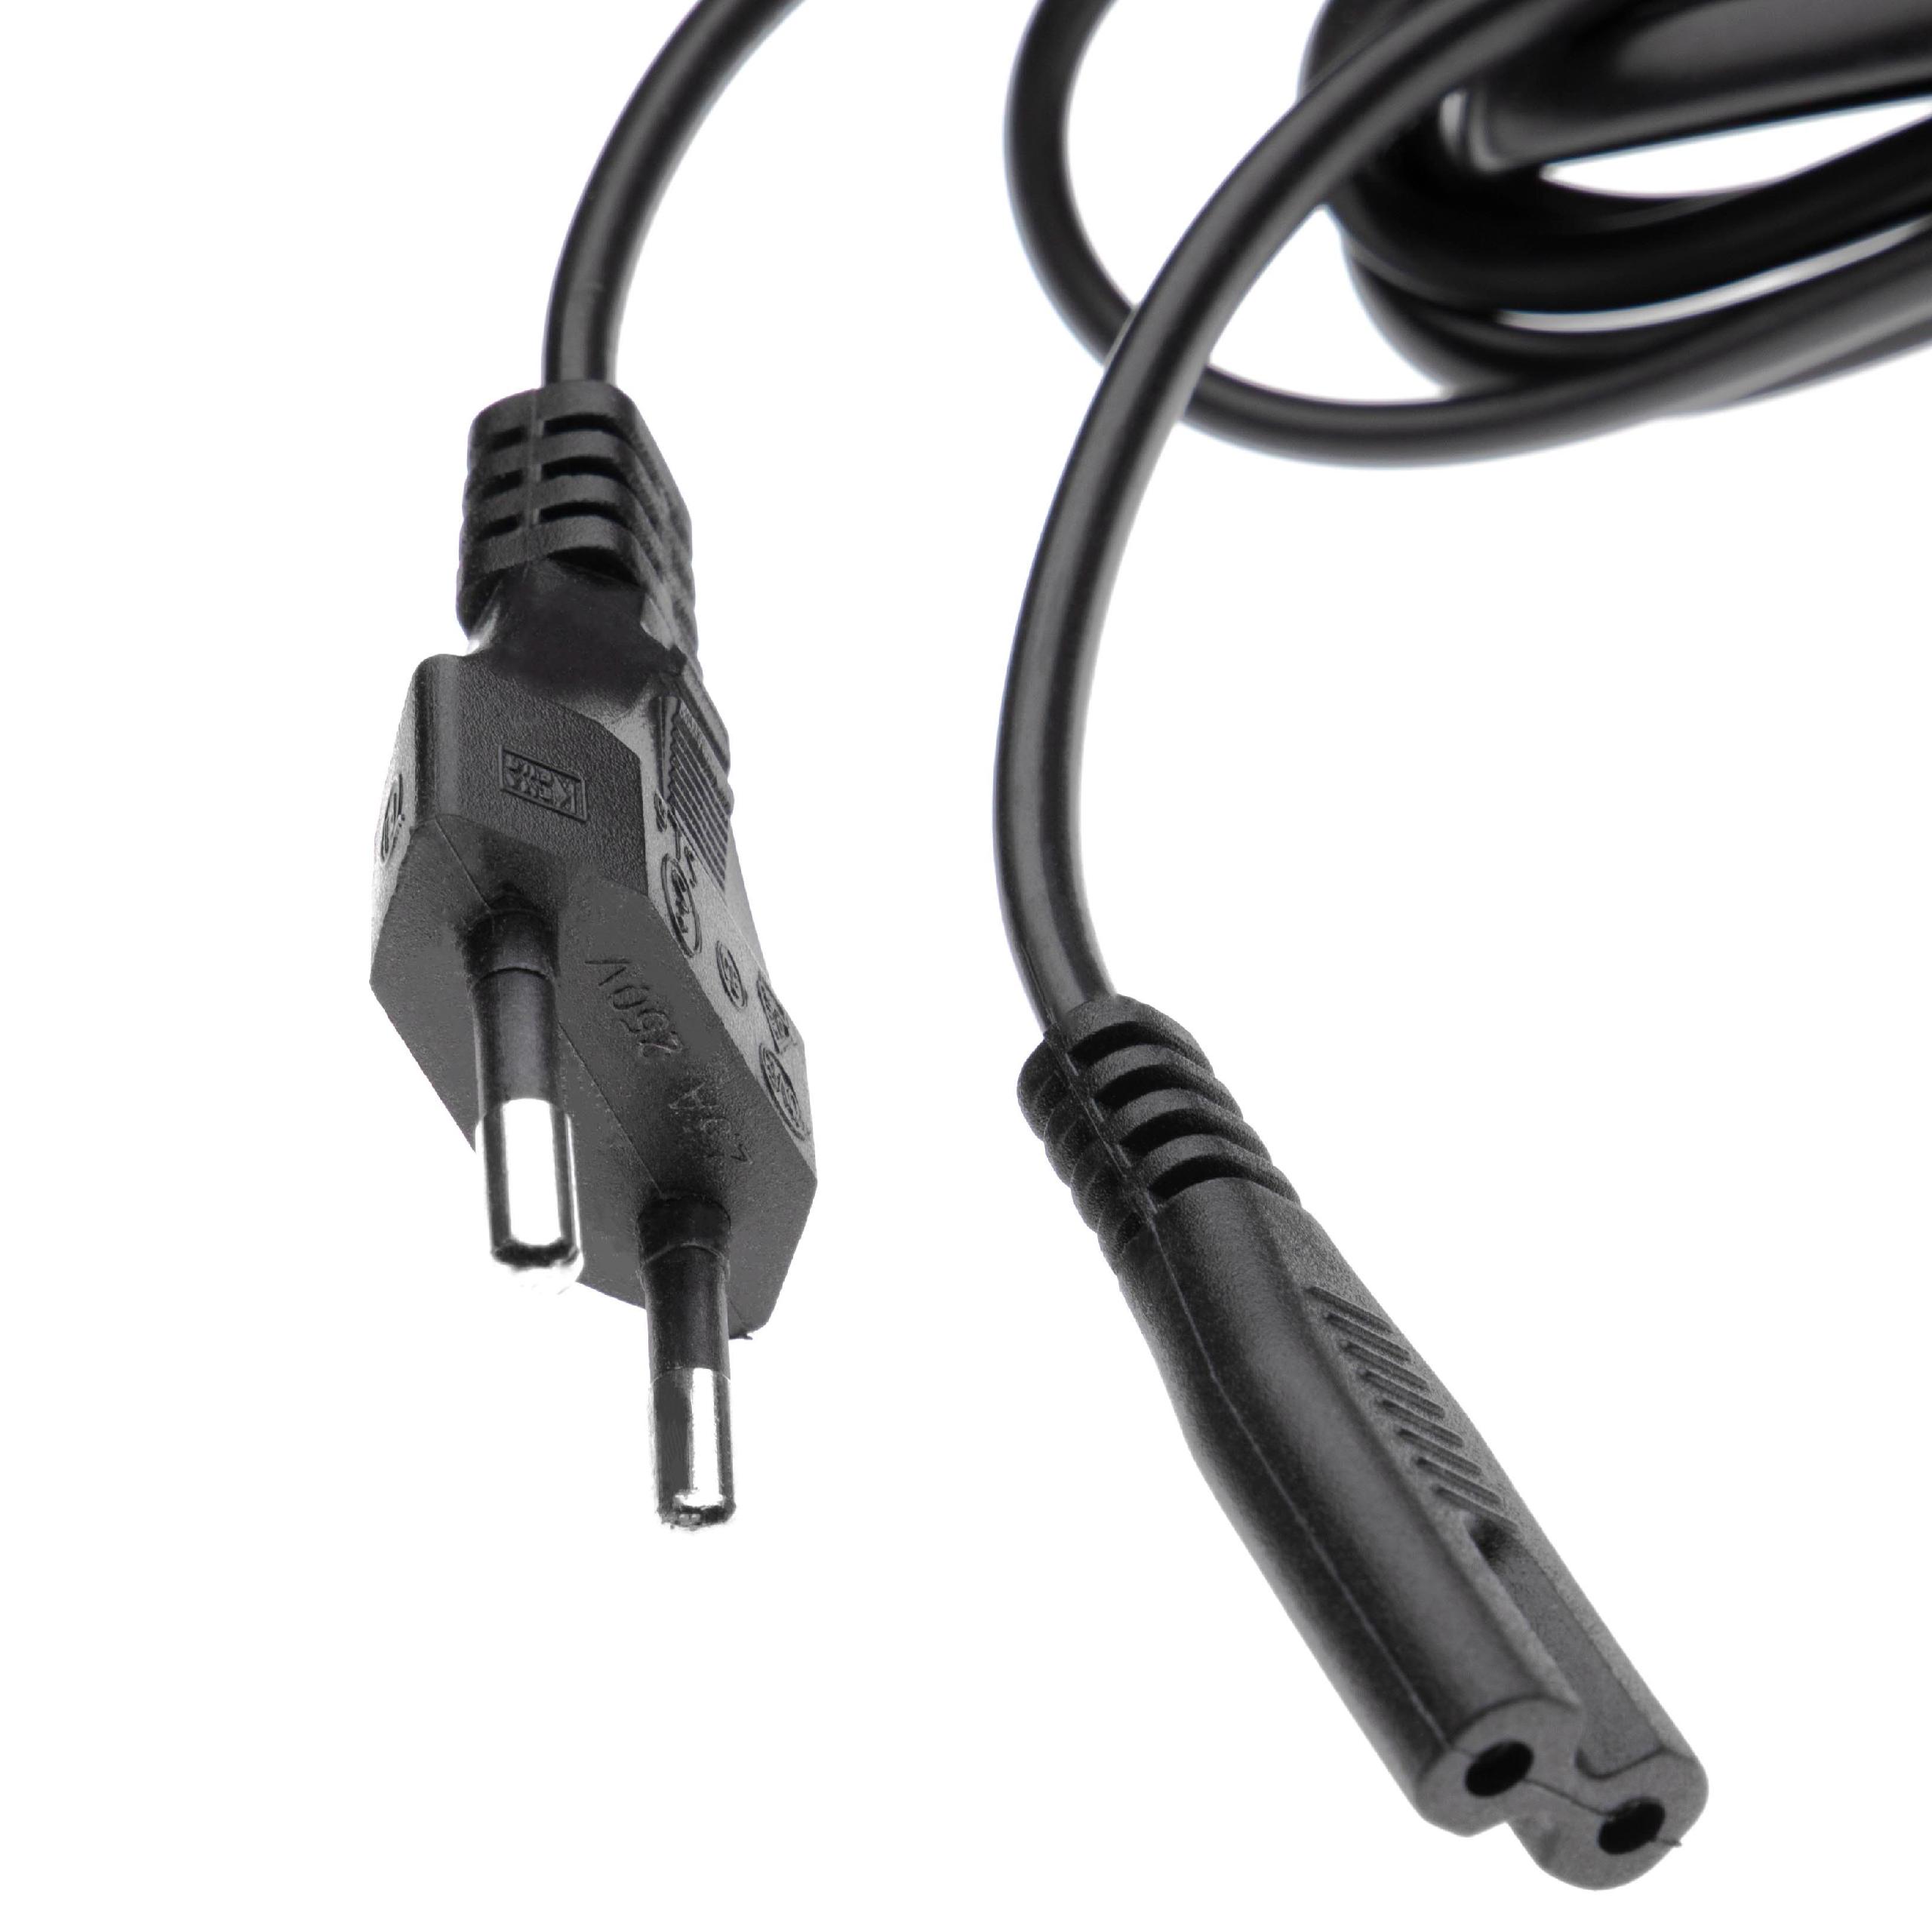 C7 Power Cable Euro Plug suitable for Devices e.g. PC Monitor Computer - 1.2 m